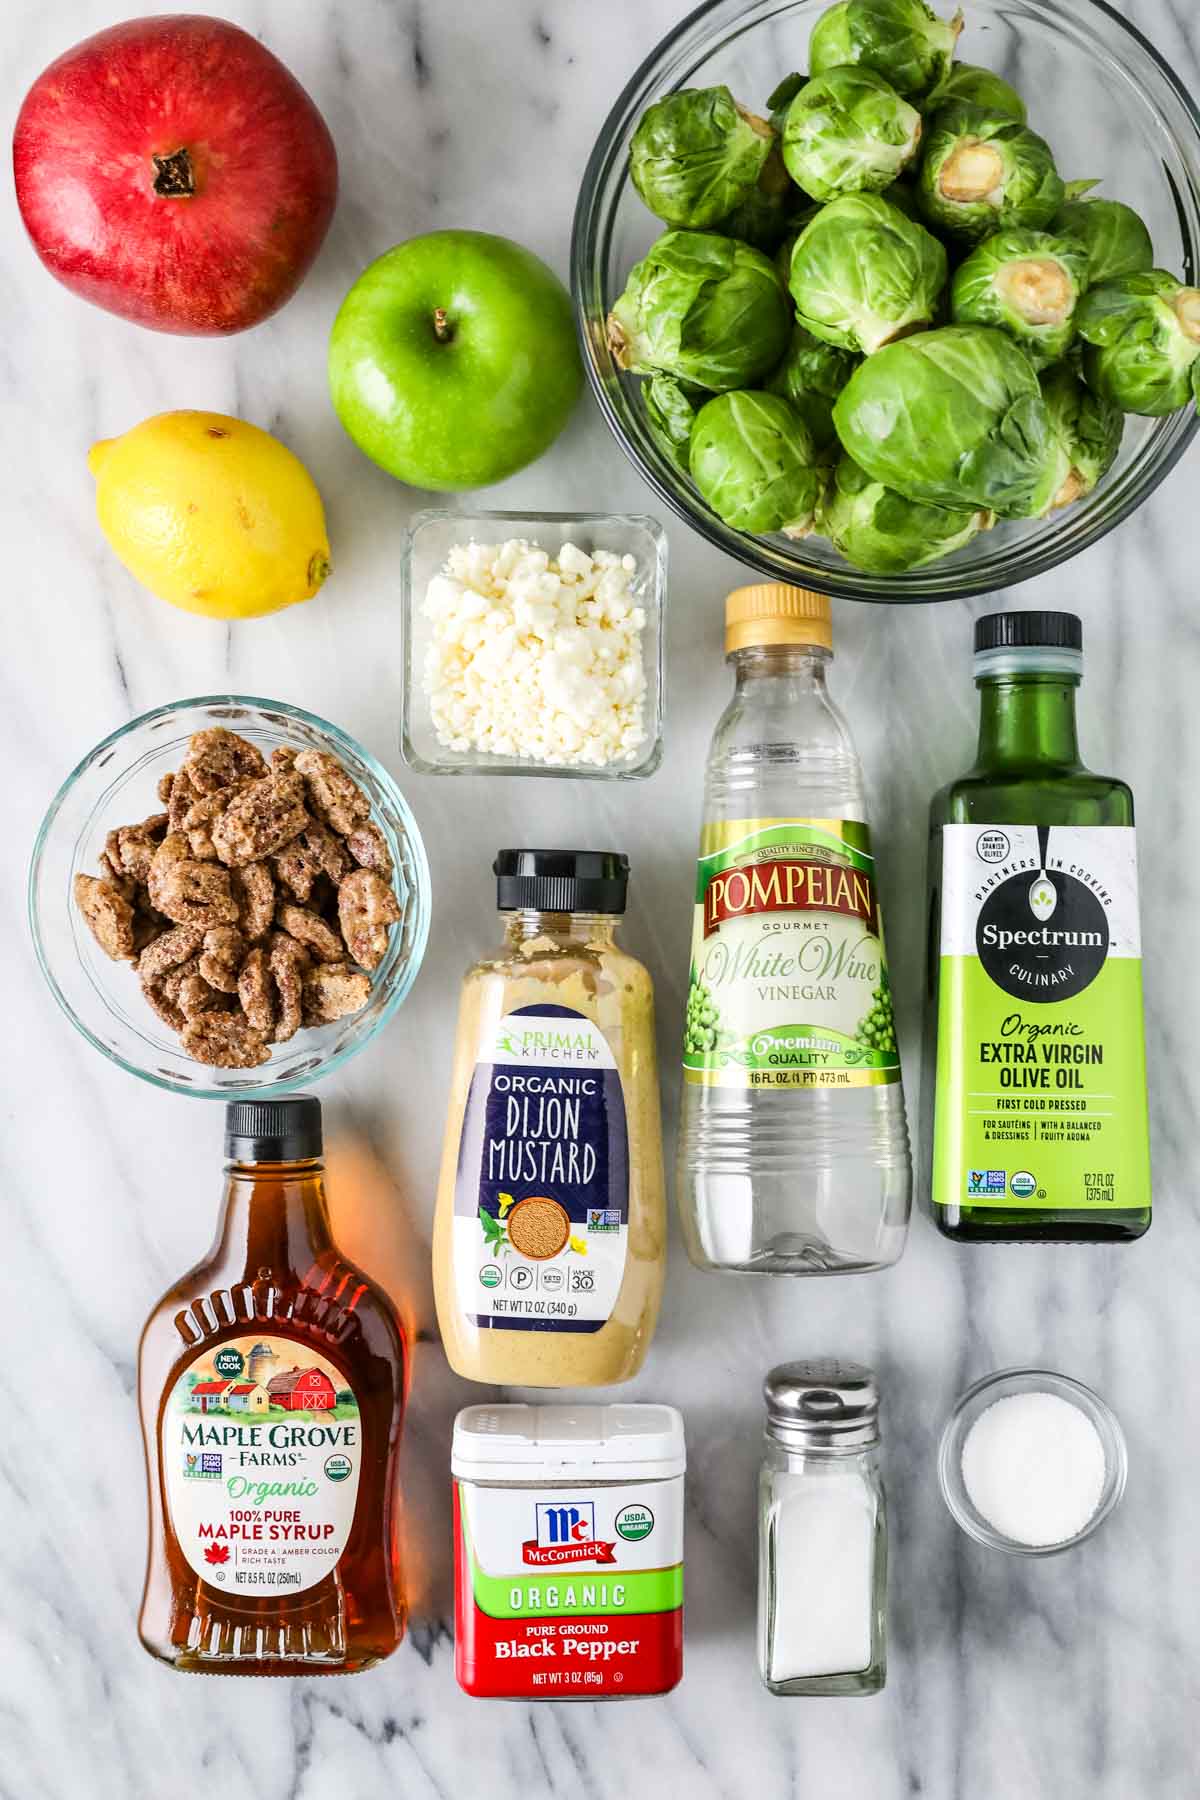 Ingredients for brussels sprouts salad